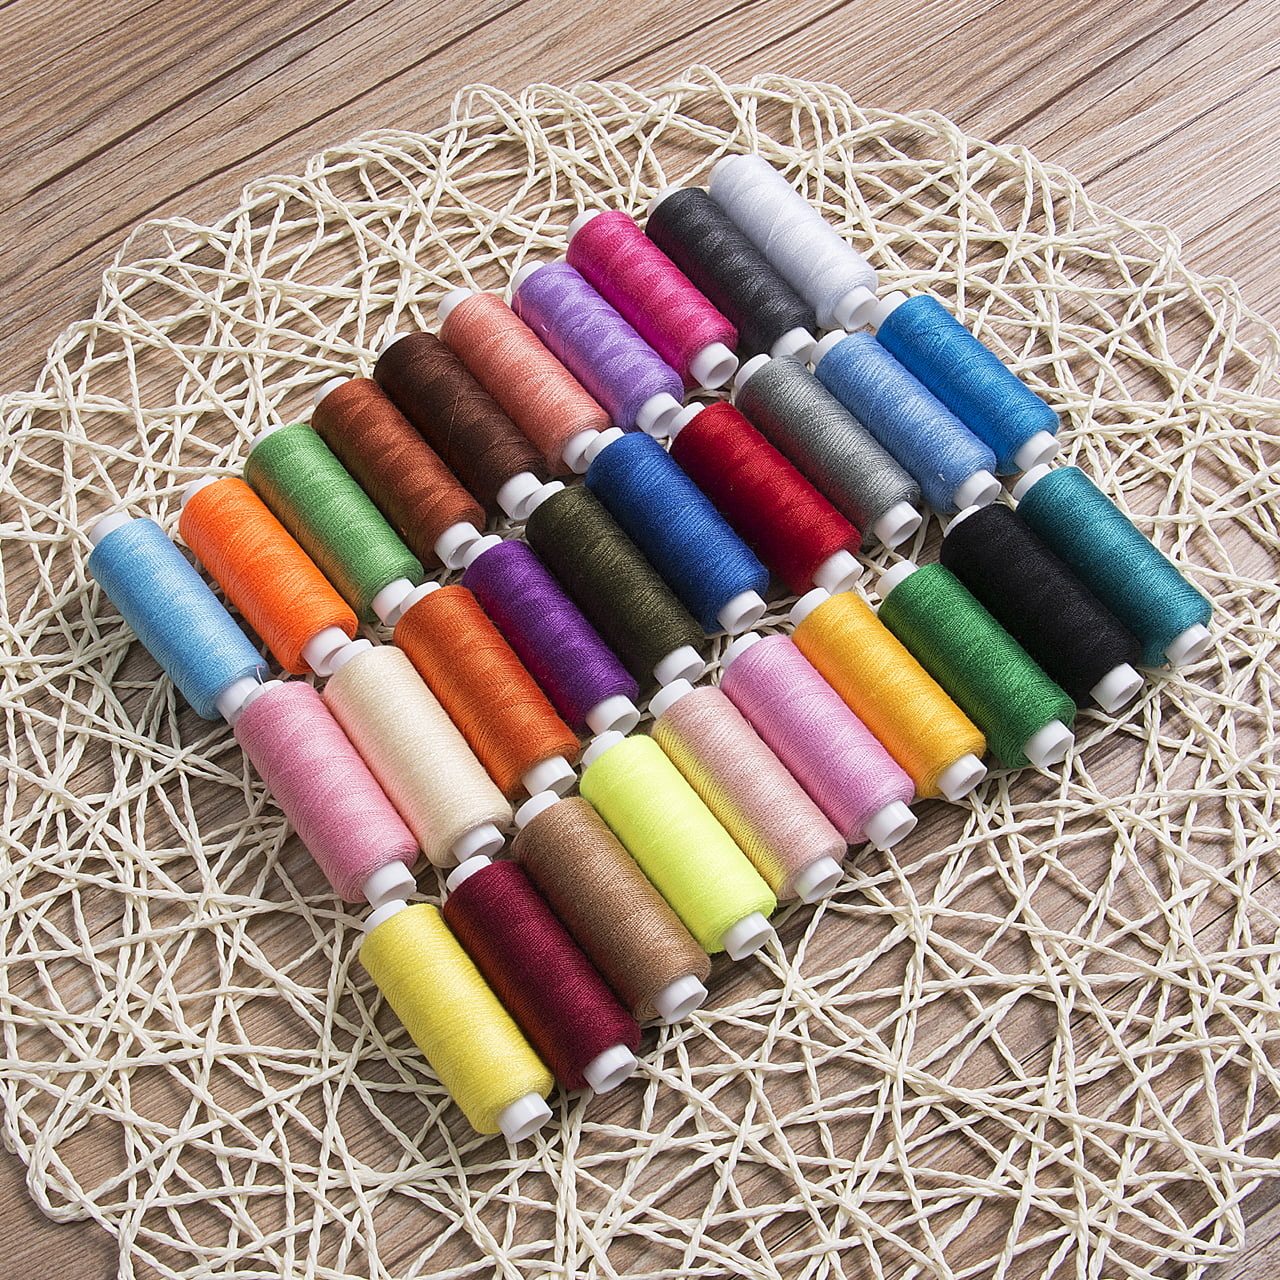 30 Spools Mixed Colors 100% Polyester Sewing Quilting Hand Stitching Threads Set